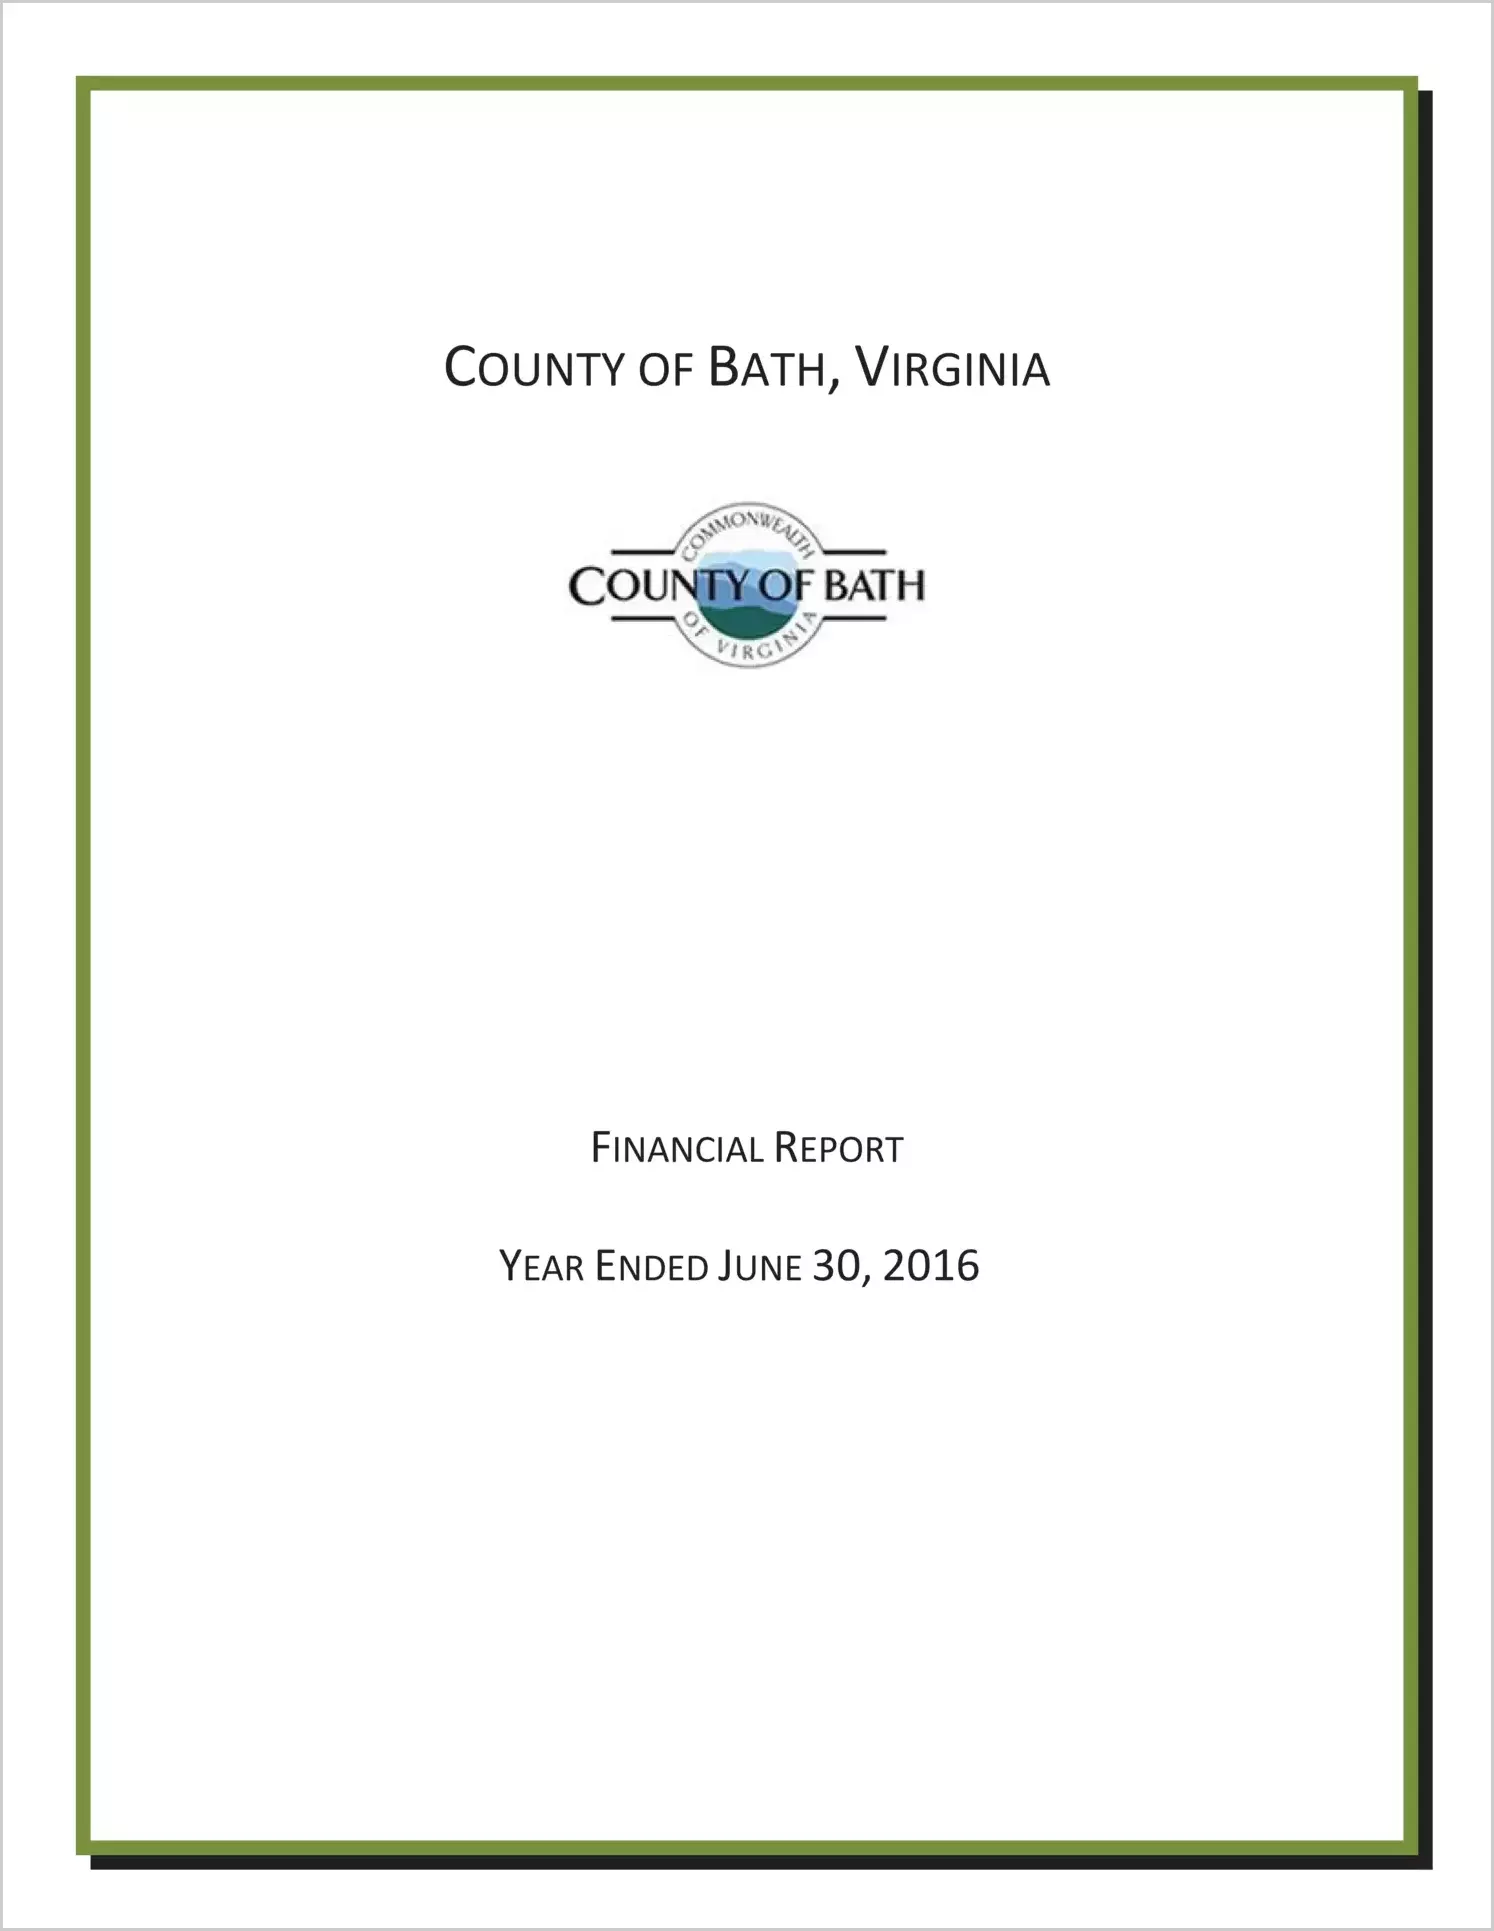 2016 Annual Financial Report for County of Bath